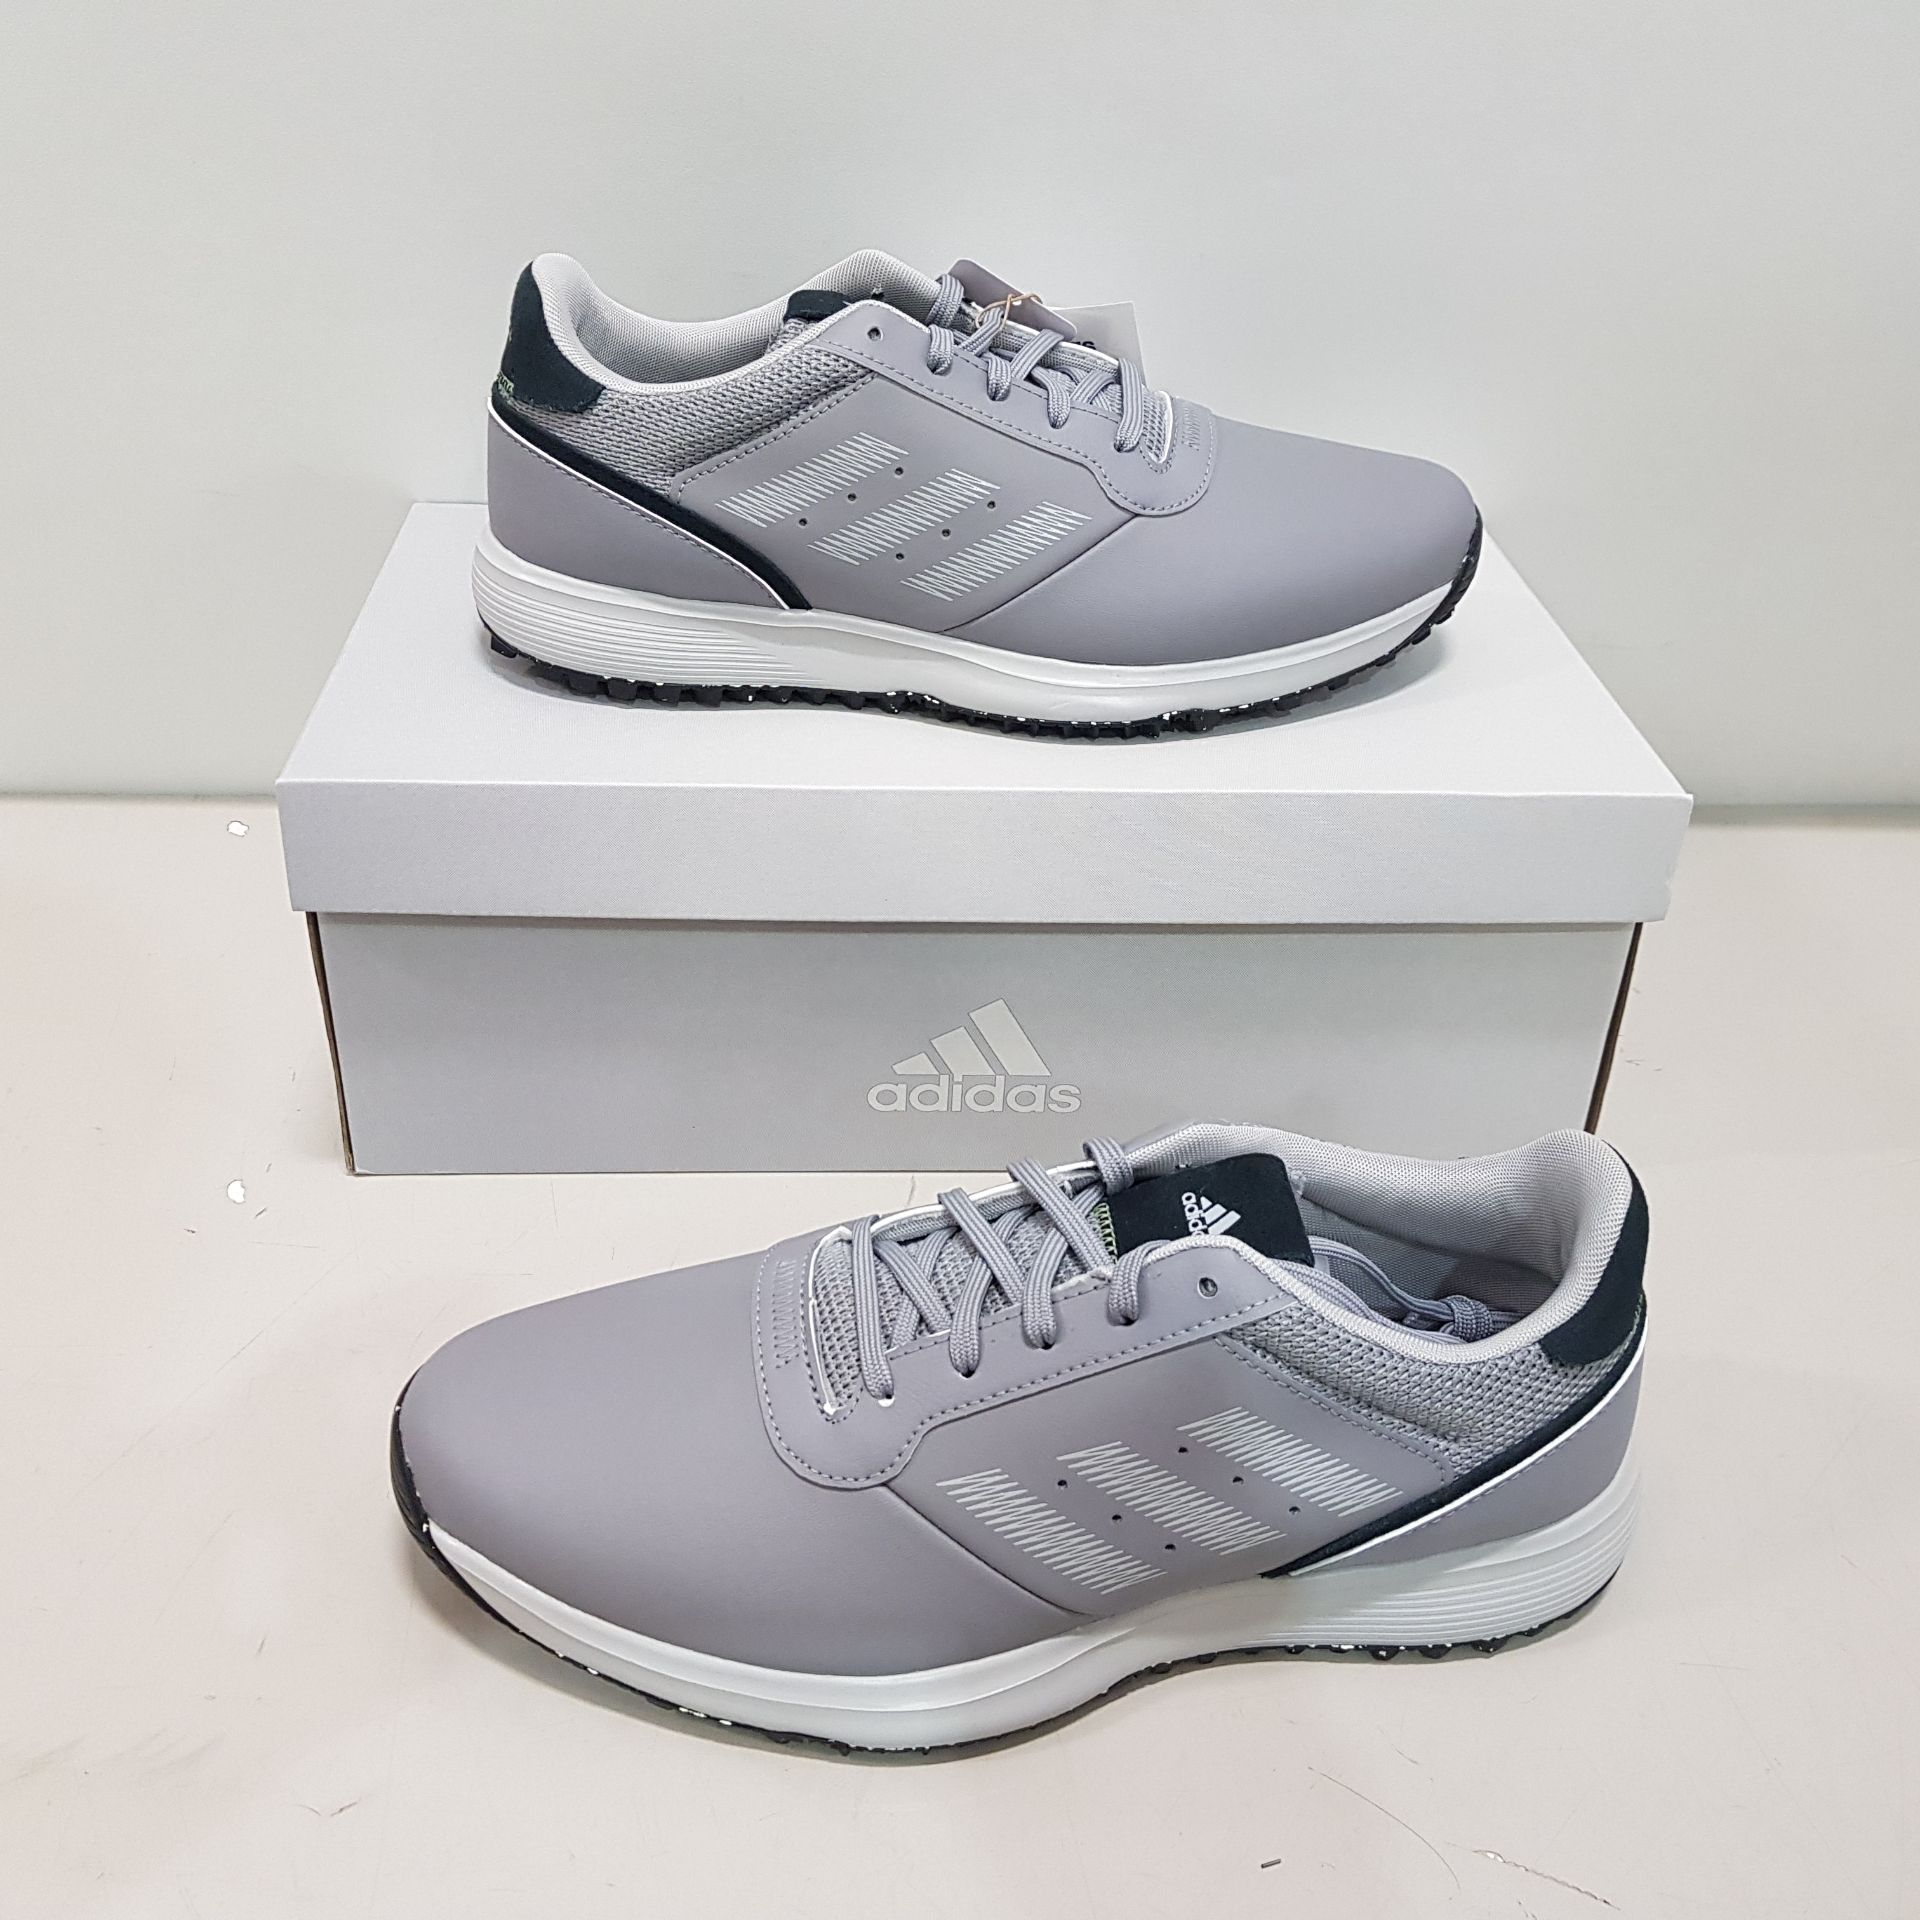 5 X BRAND NEW BOXED ADIDAS GOLF TRAINERS IN GREY / BLACK ALL IN SIZE UK 8 ( GZ3884)